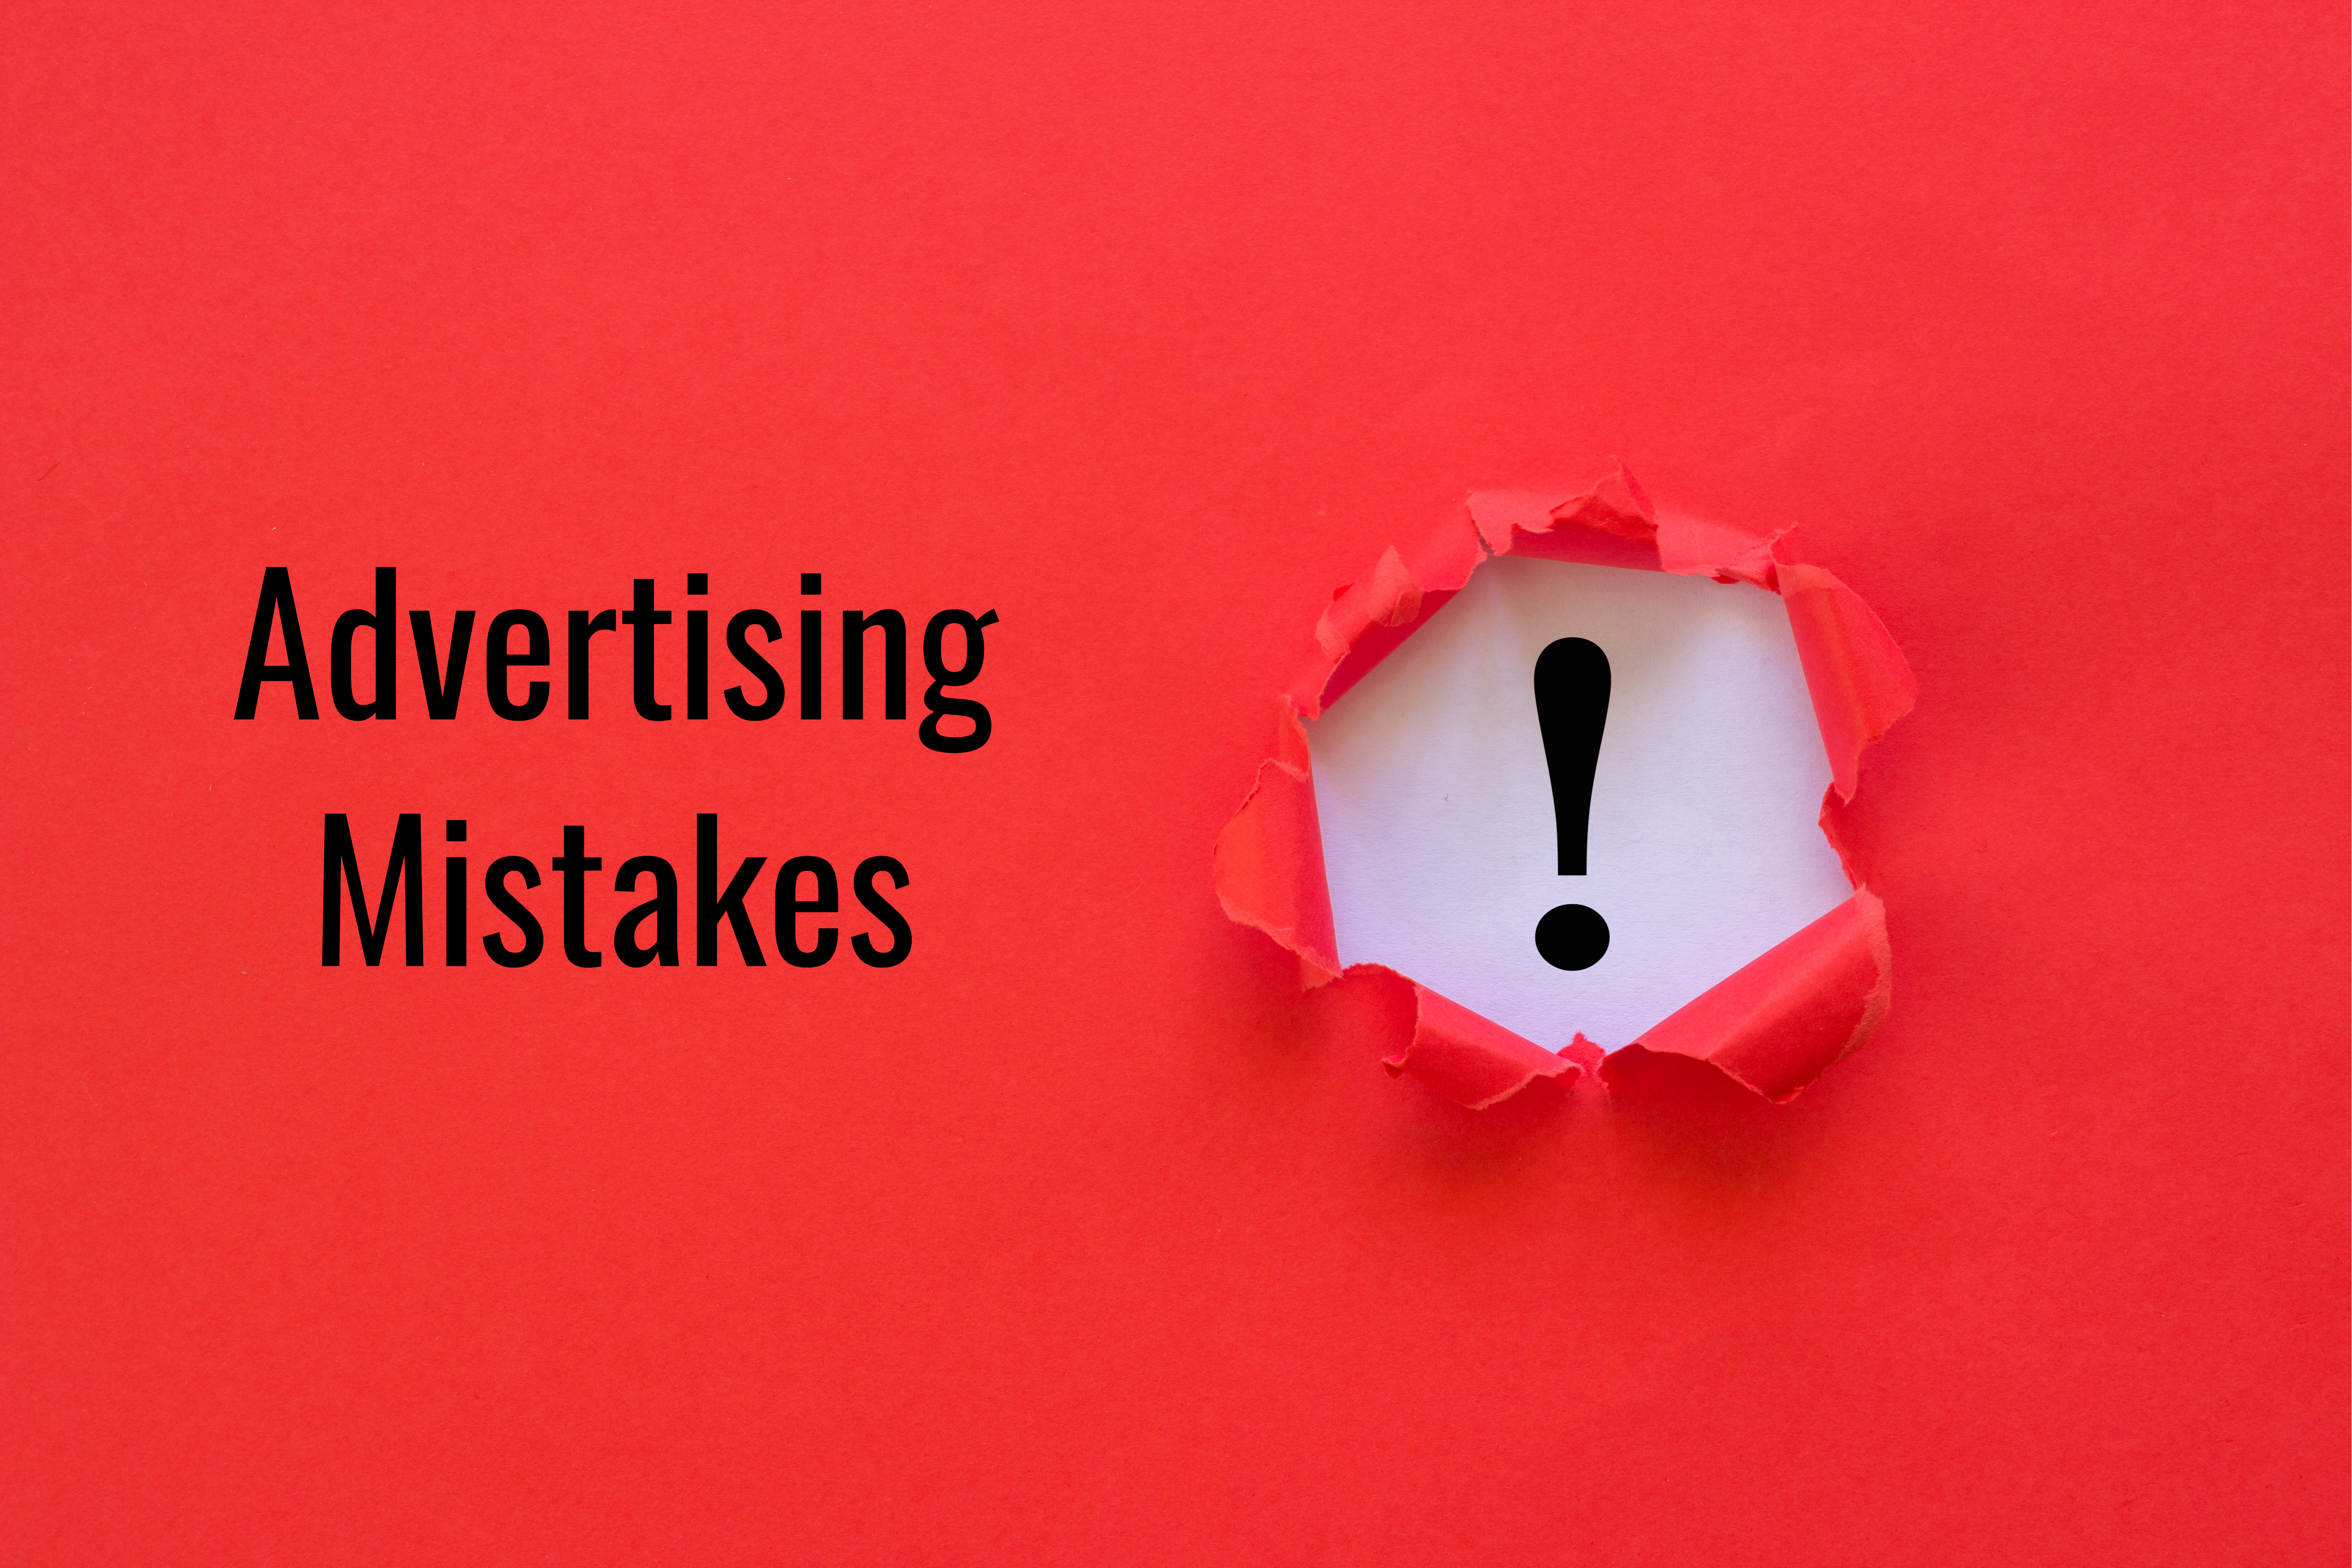 Biggest Advertising Mistakes: Trying to be All Things to All People